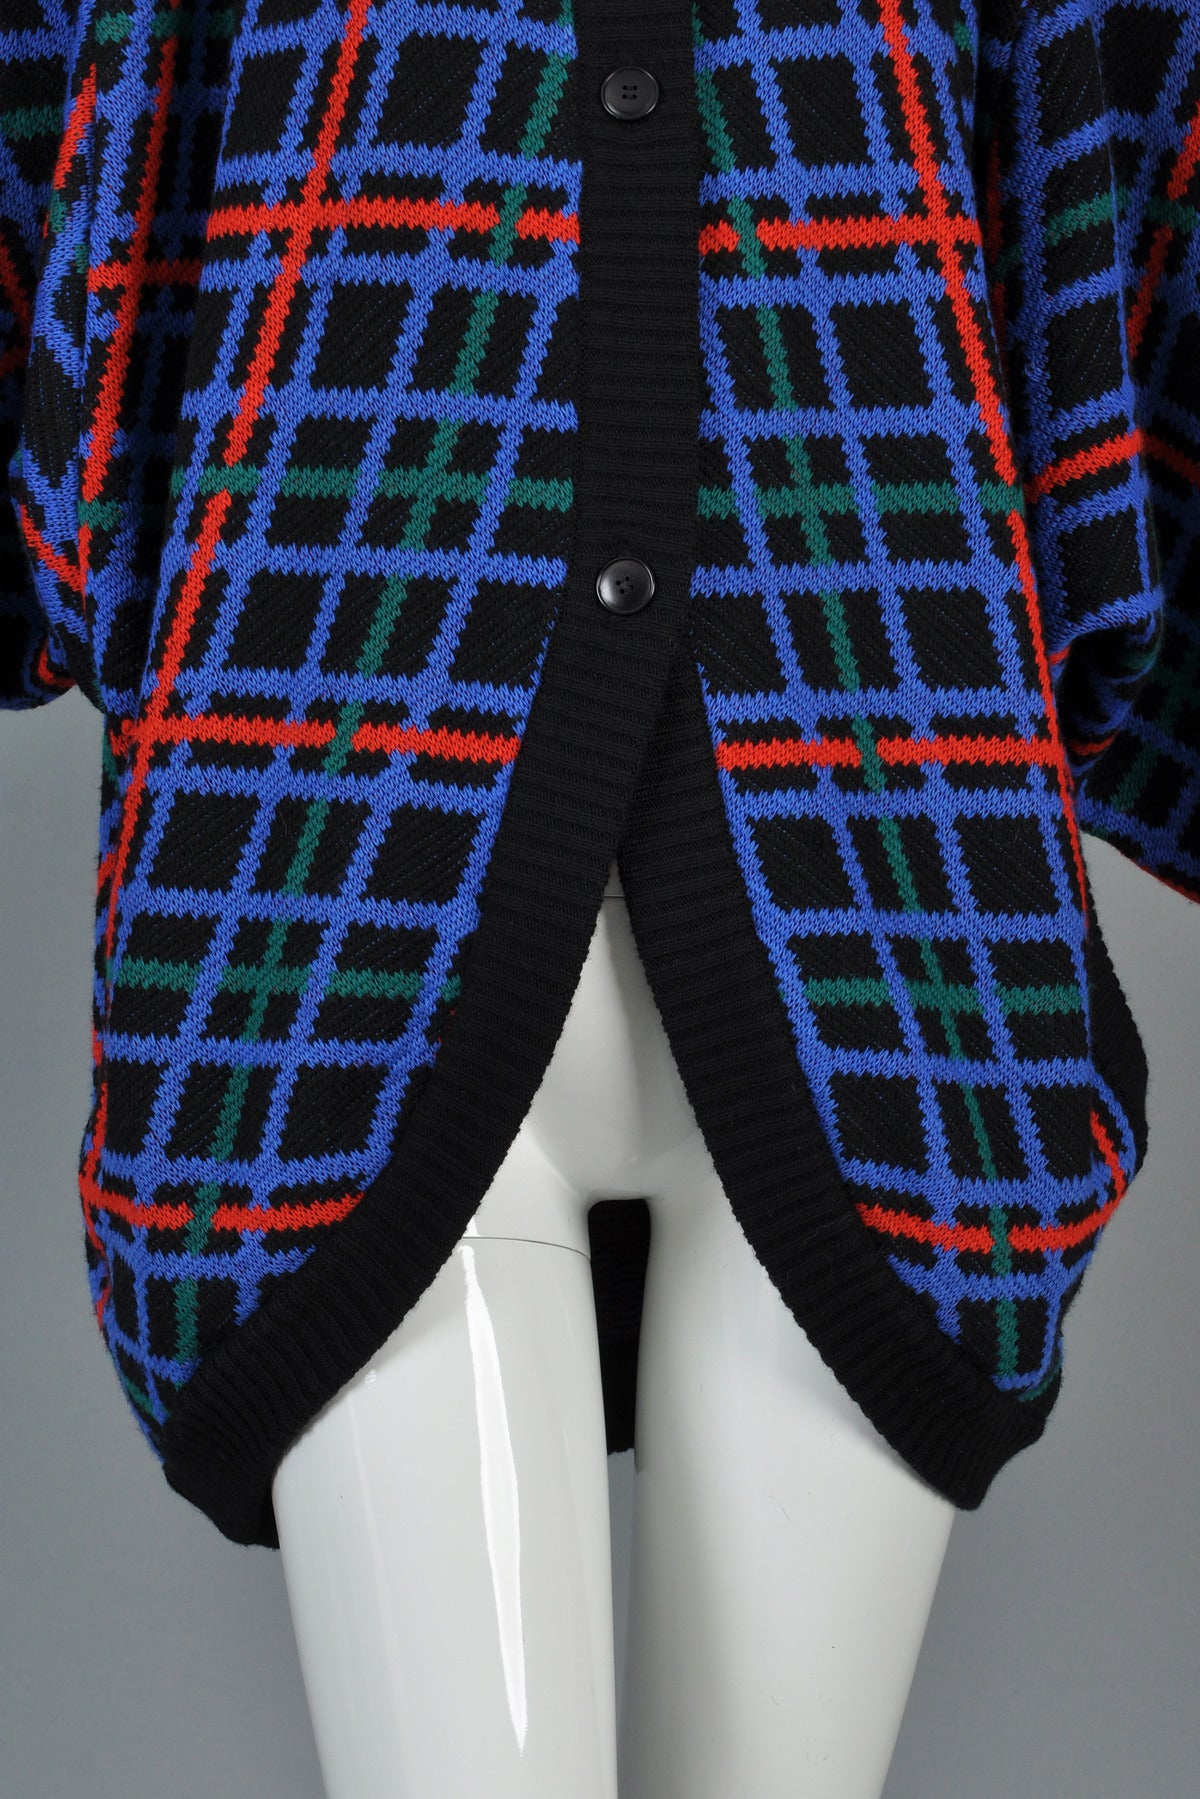 Yves Saint Laurent 1980s Plaid Hooded Knit Cocoon Jacket 1